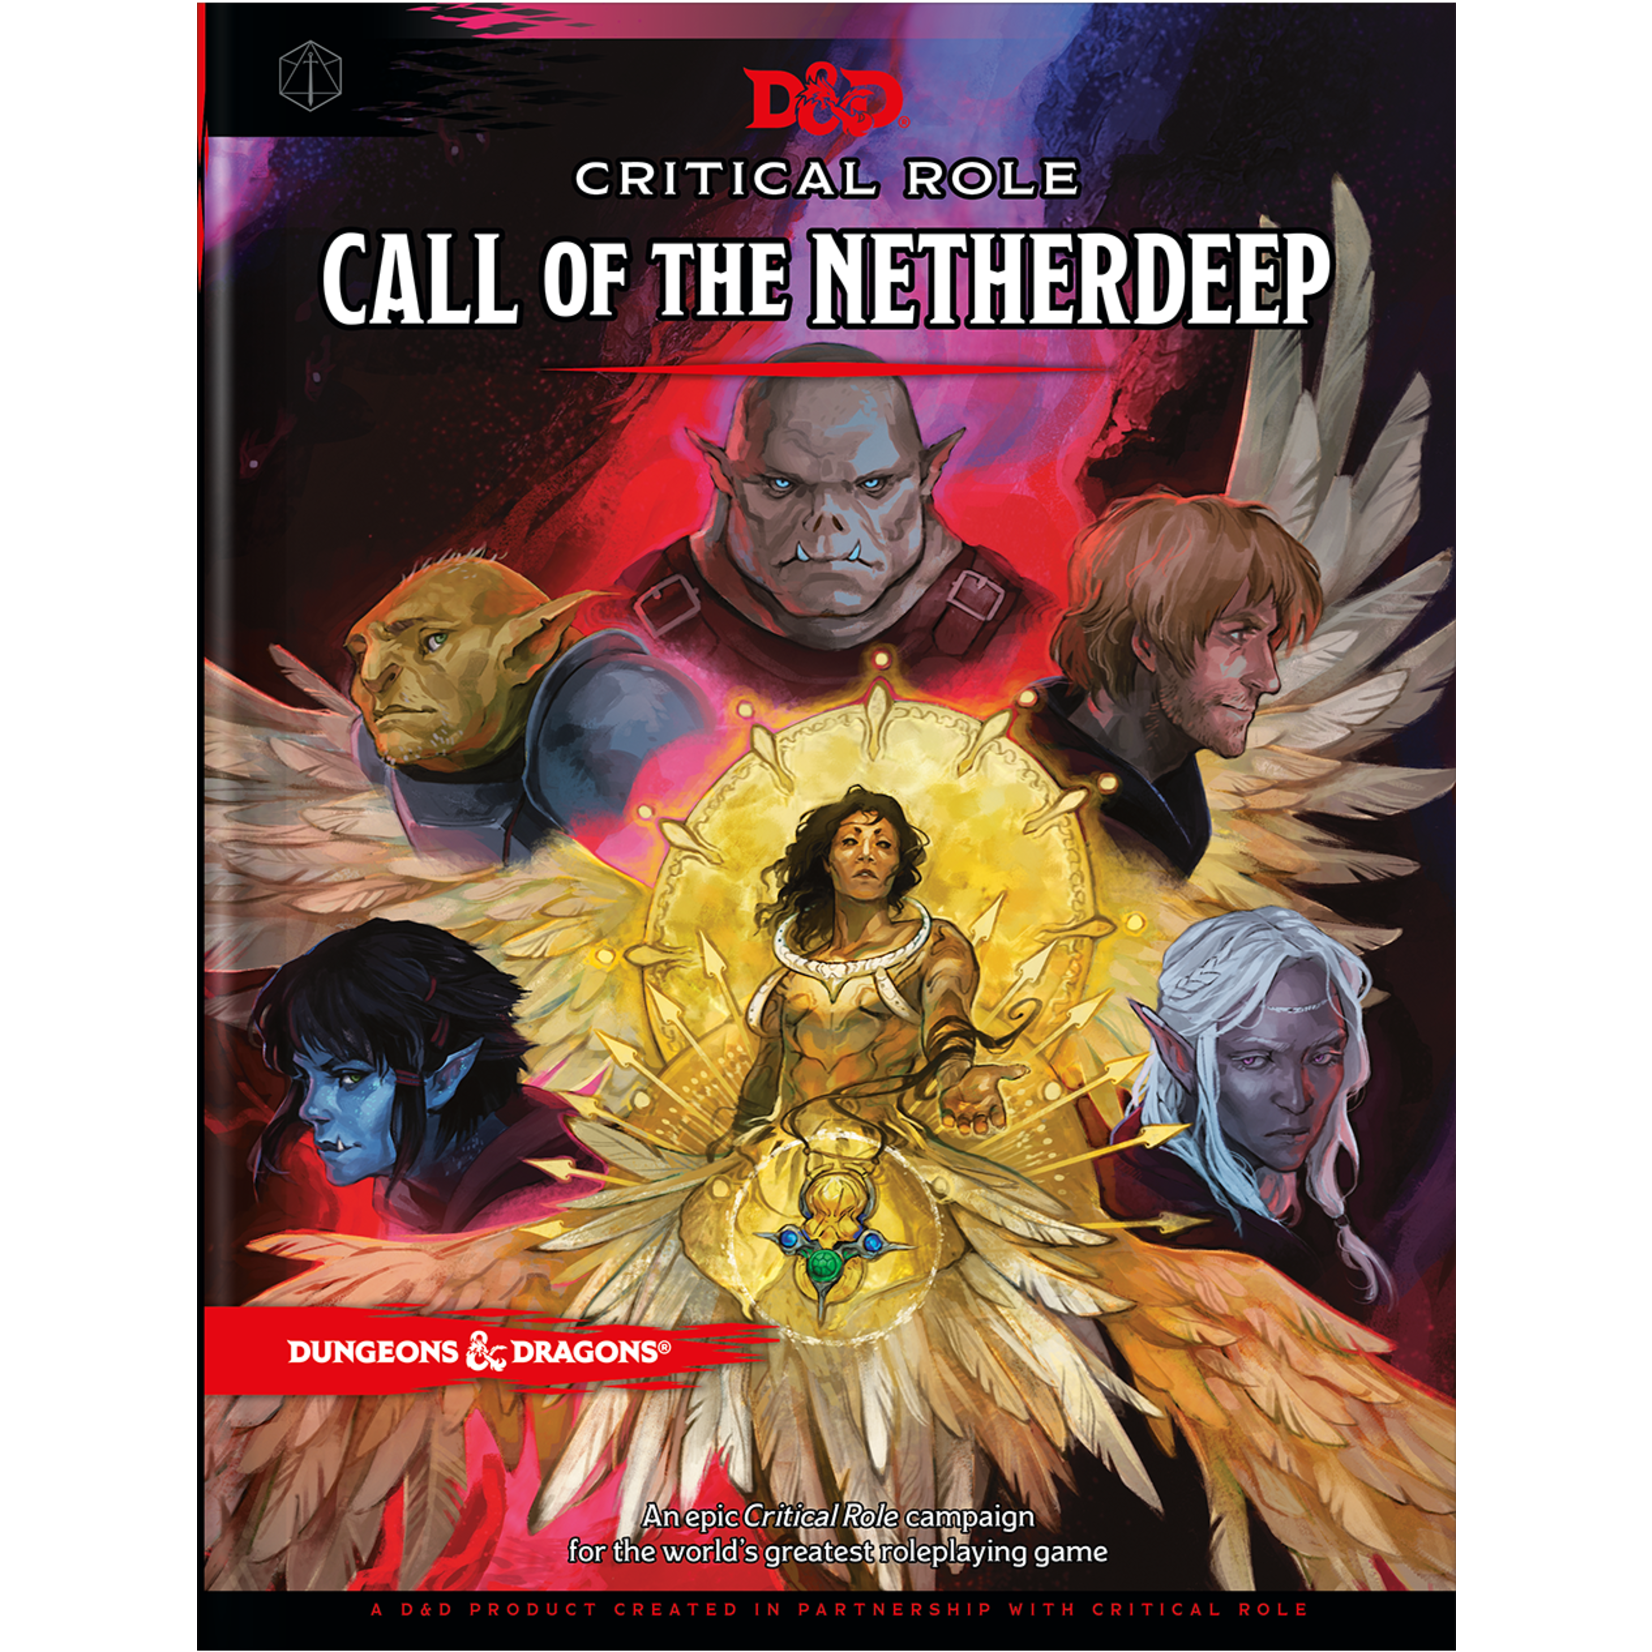 Dungeons & Dragons Dungeons & Dragons – Call of the Netherdeep (5th Edition, Critical Role)